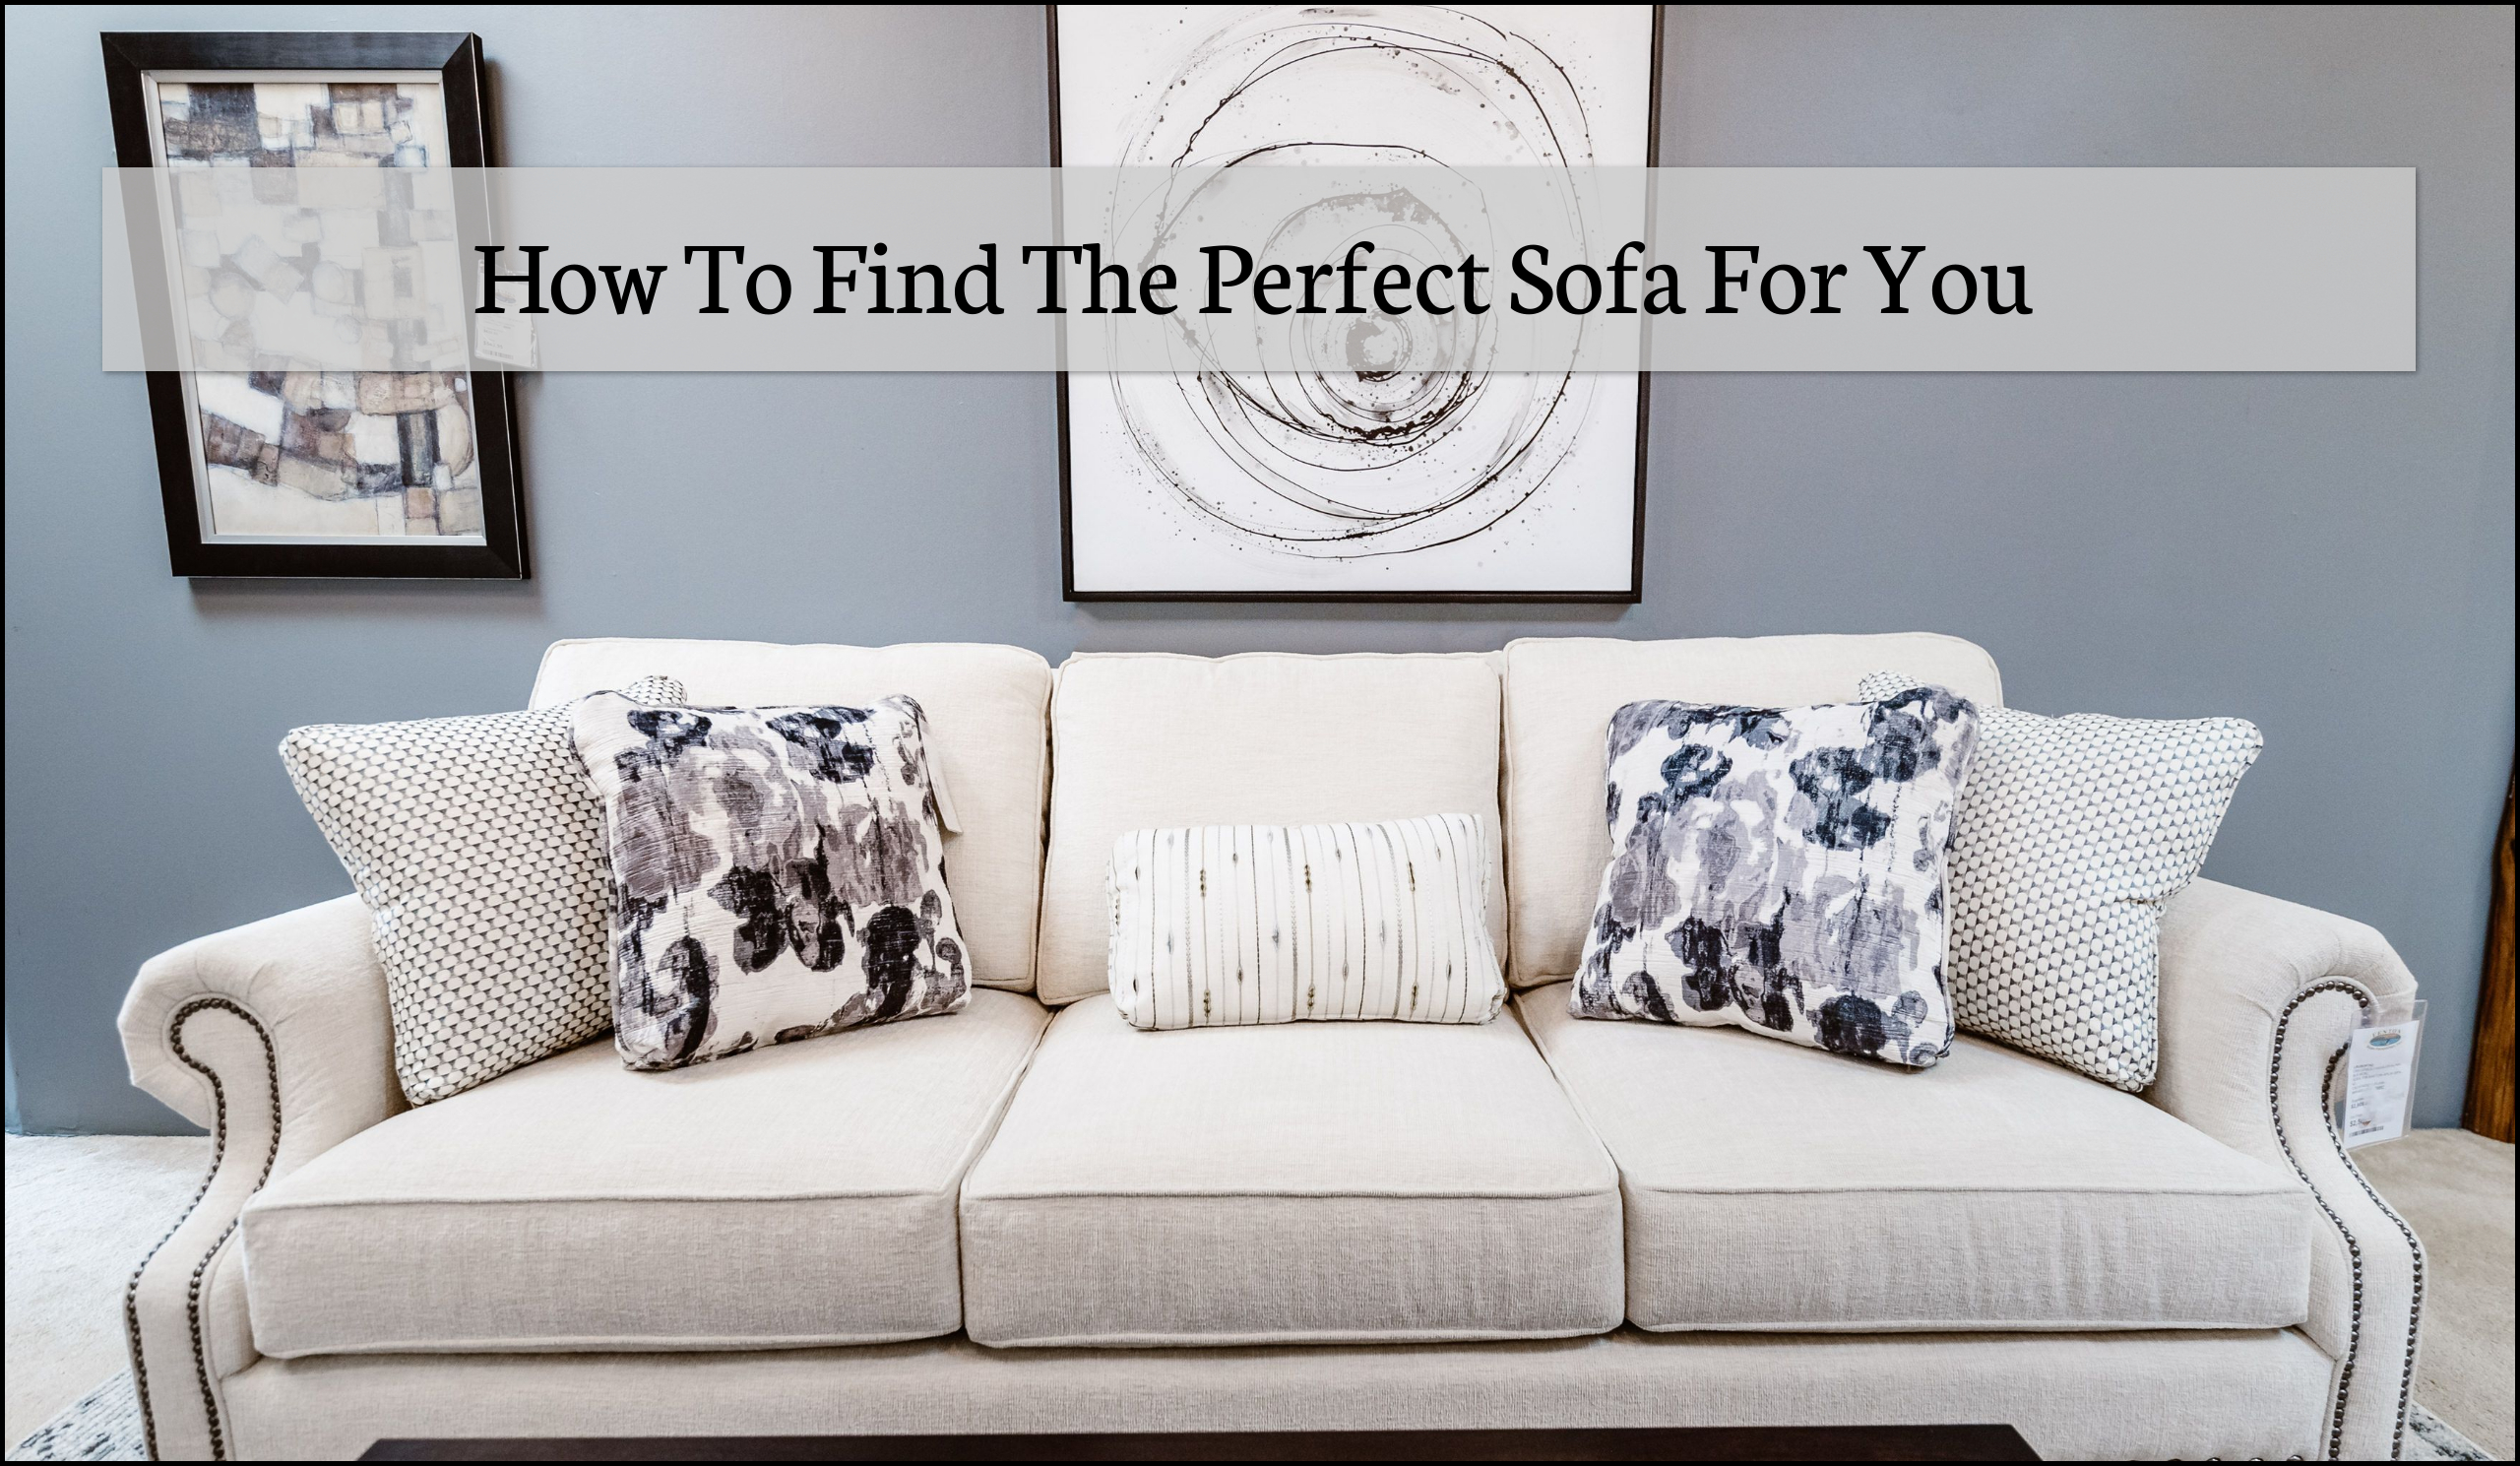 How To Find The Most Perfect Sofa For You – March 2022-Max-Quality (1)